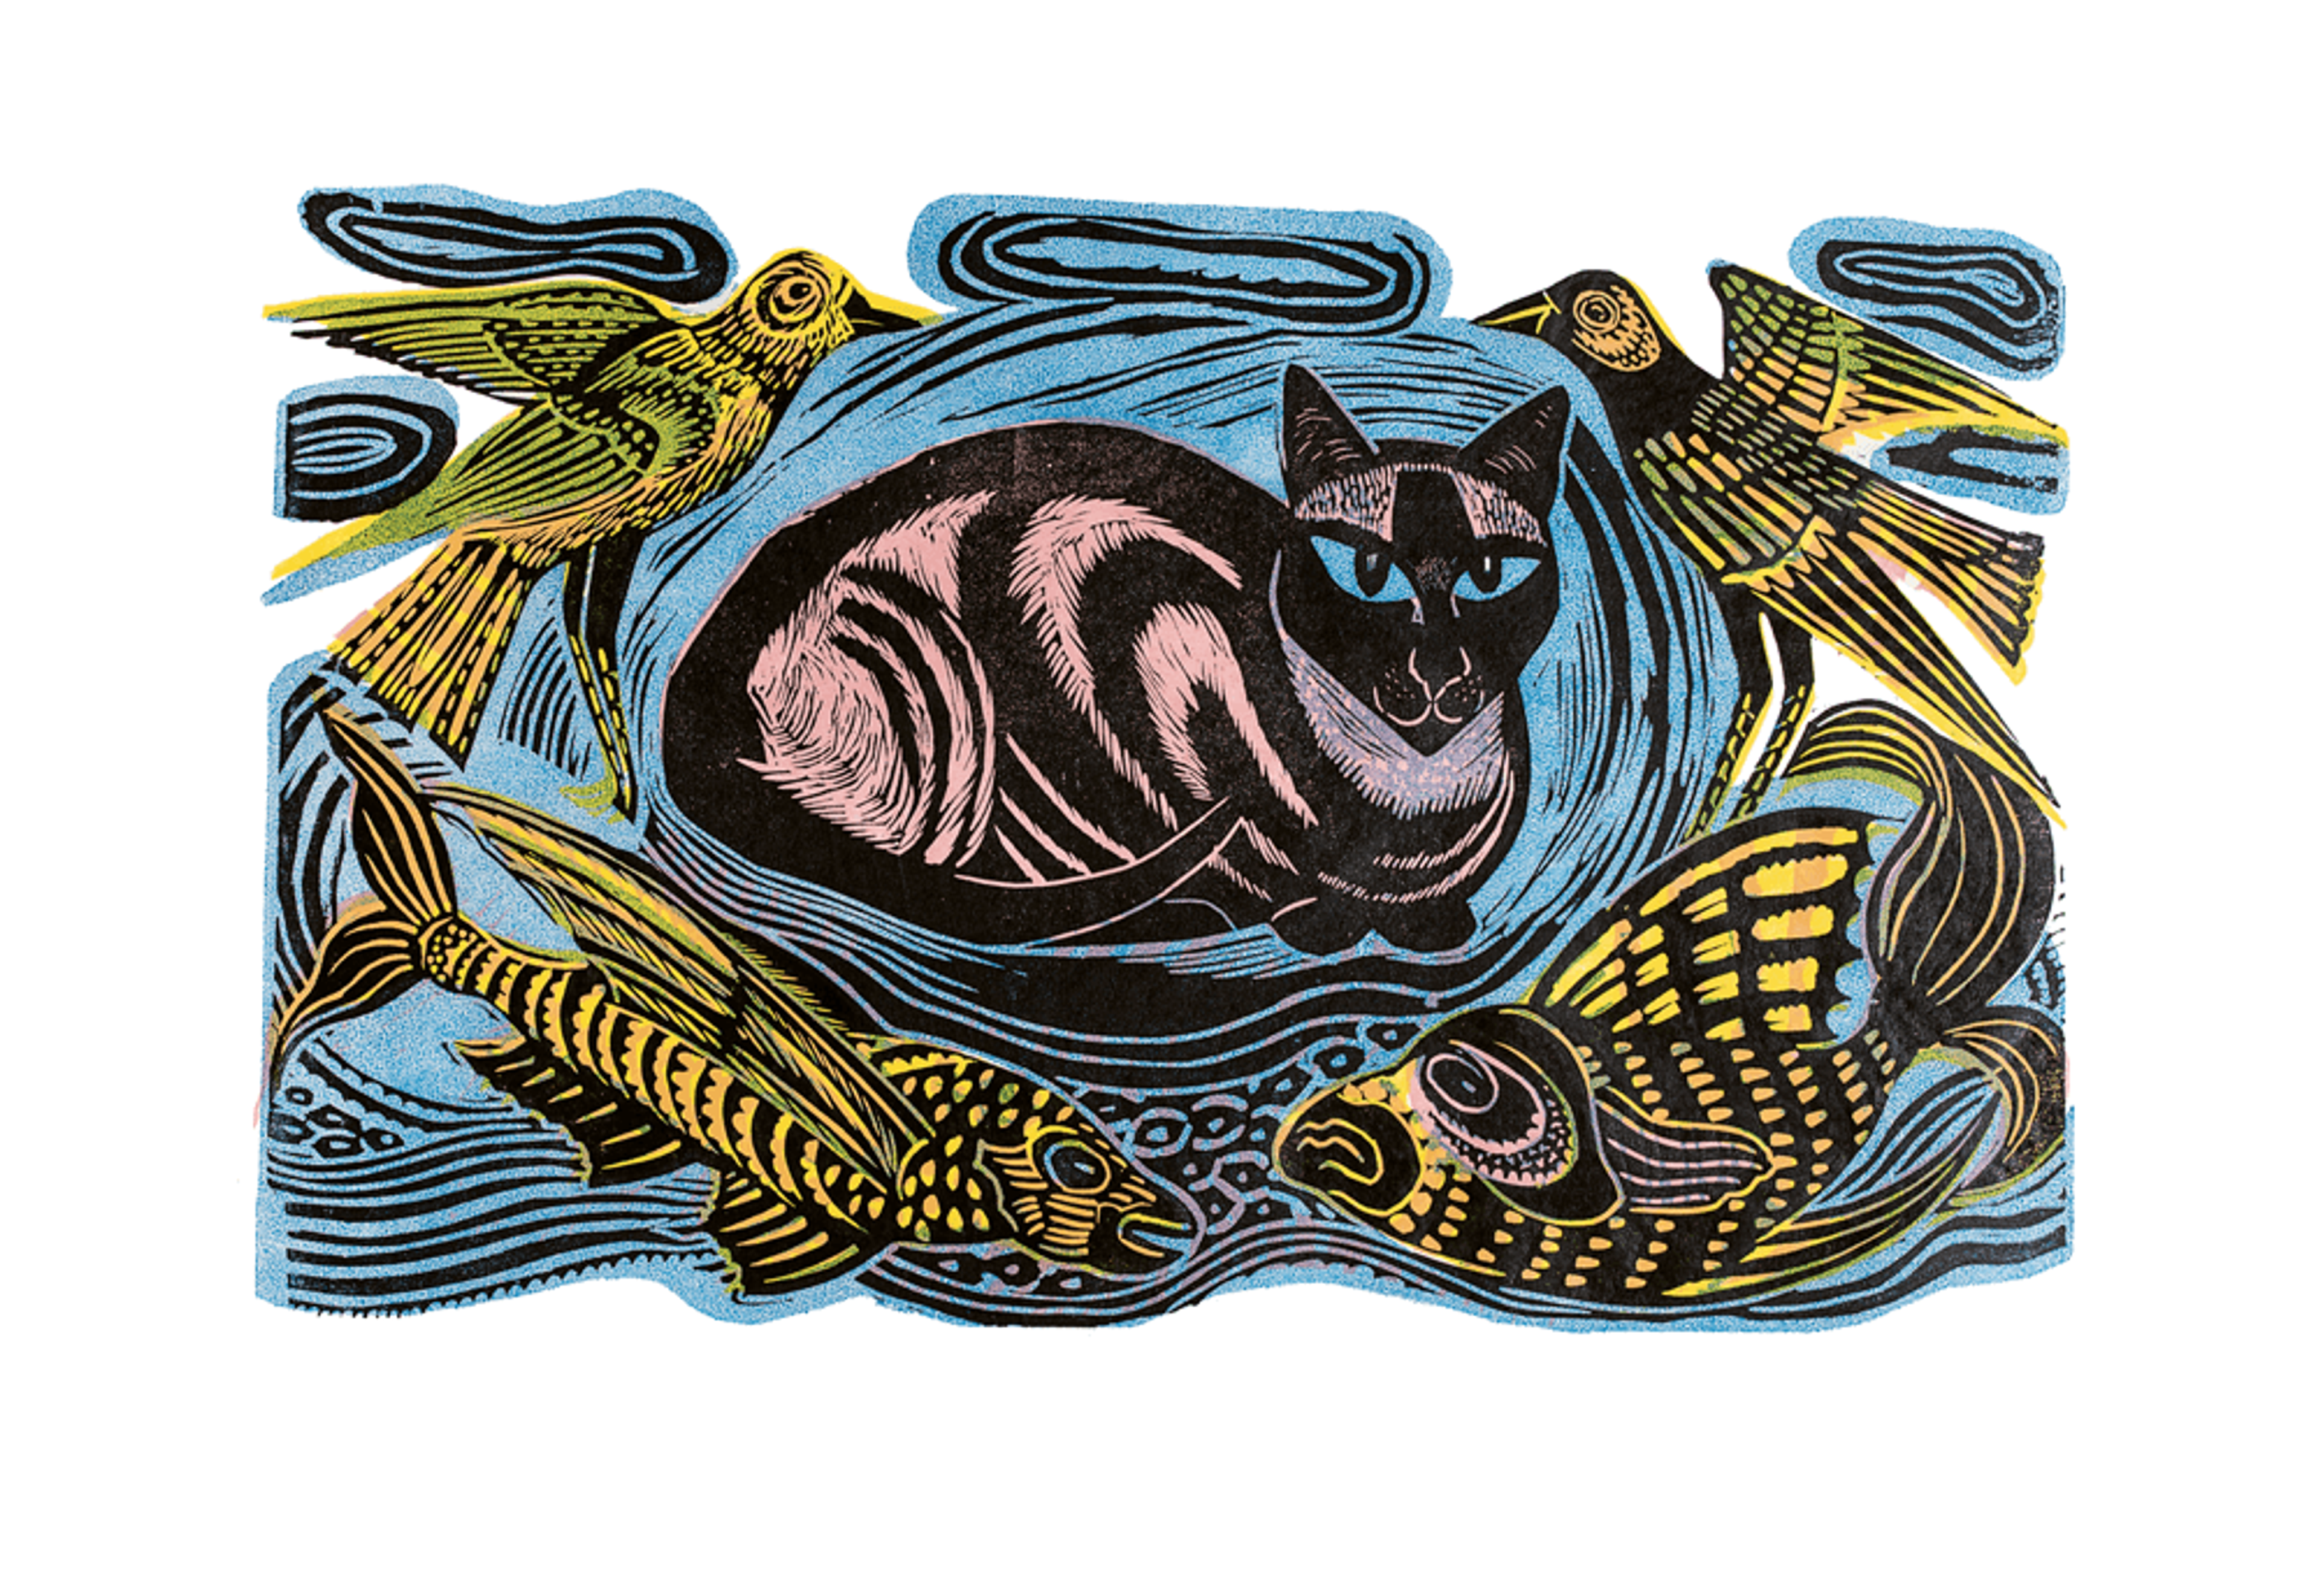 A bold and decorative illustration of a cat surrounded by birds and fish.